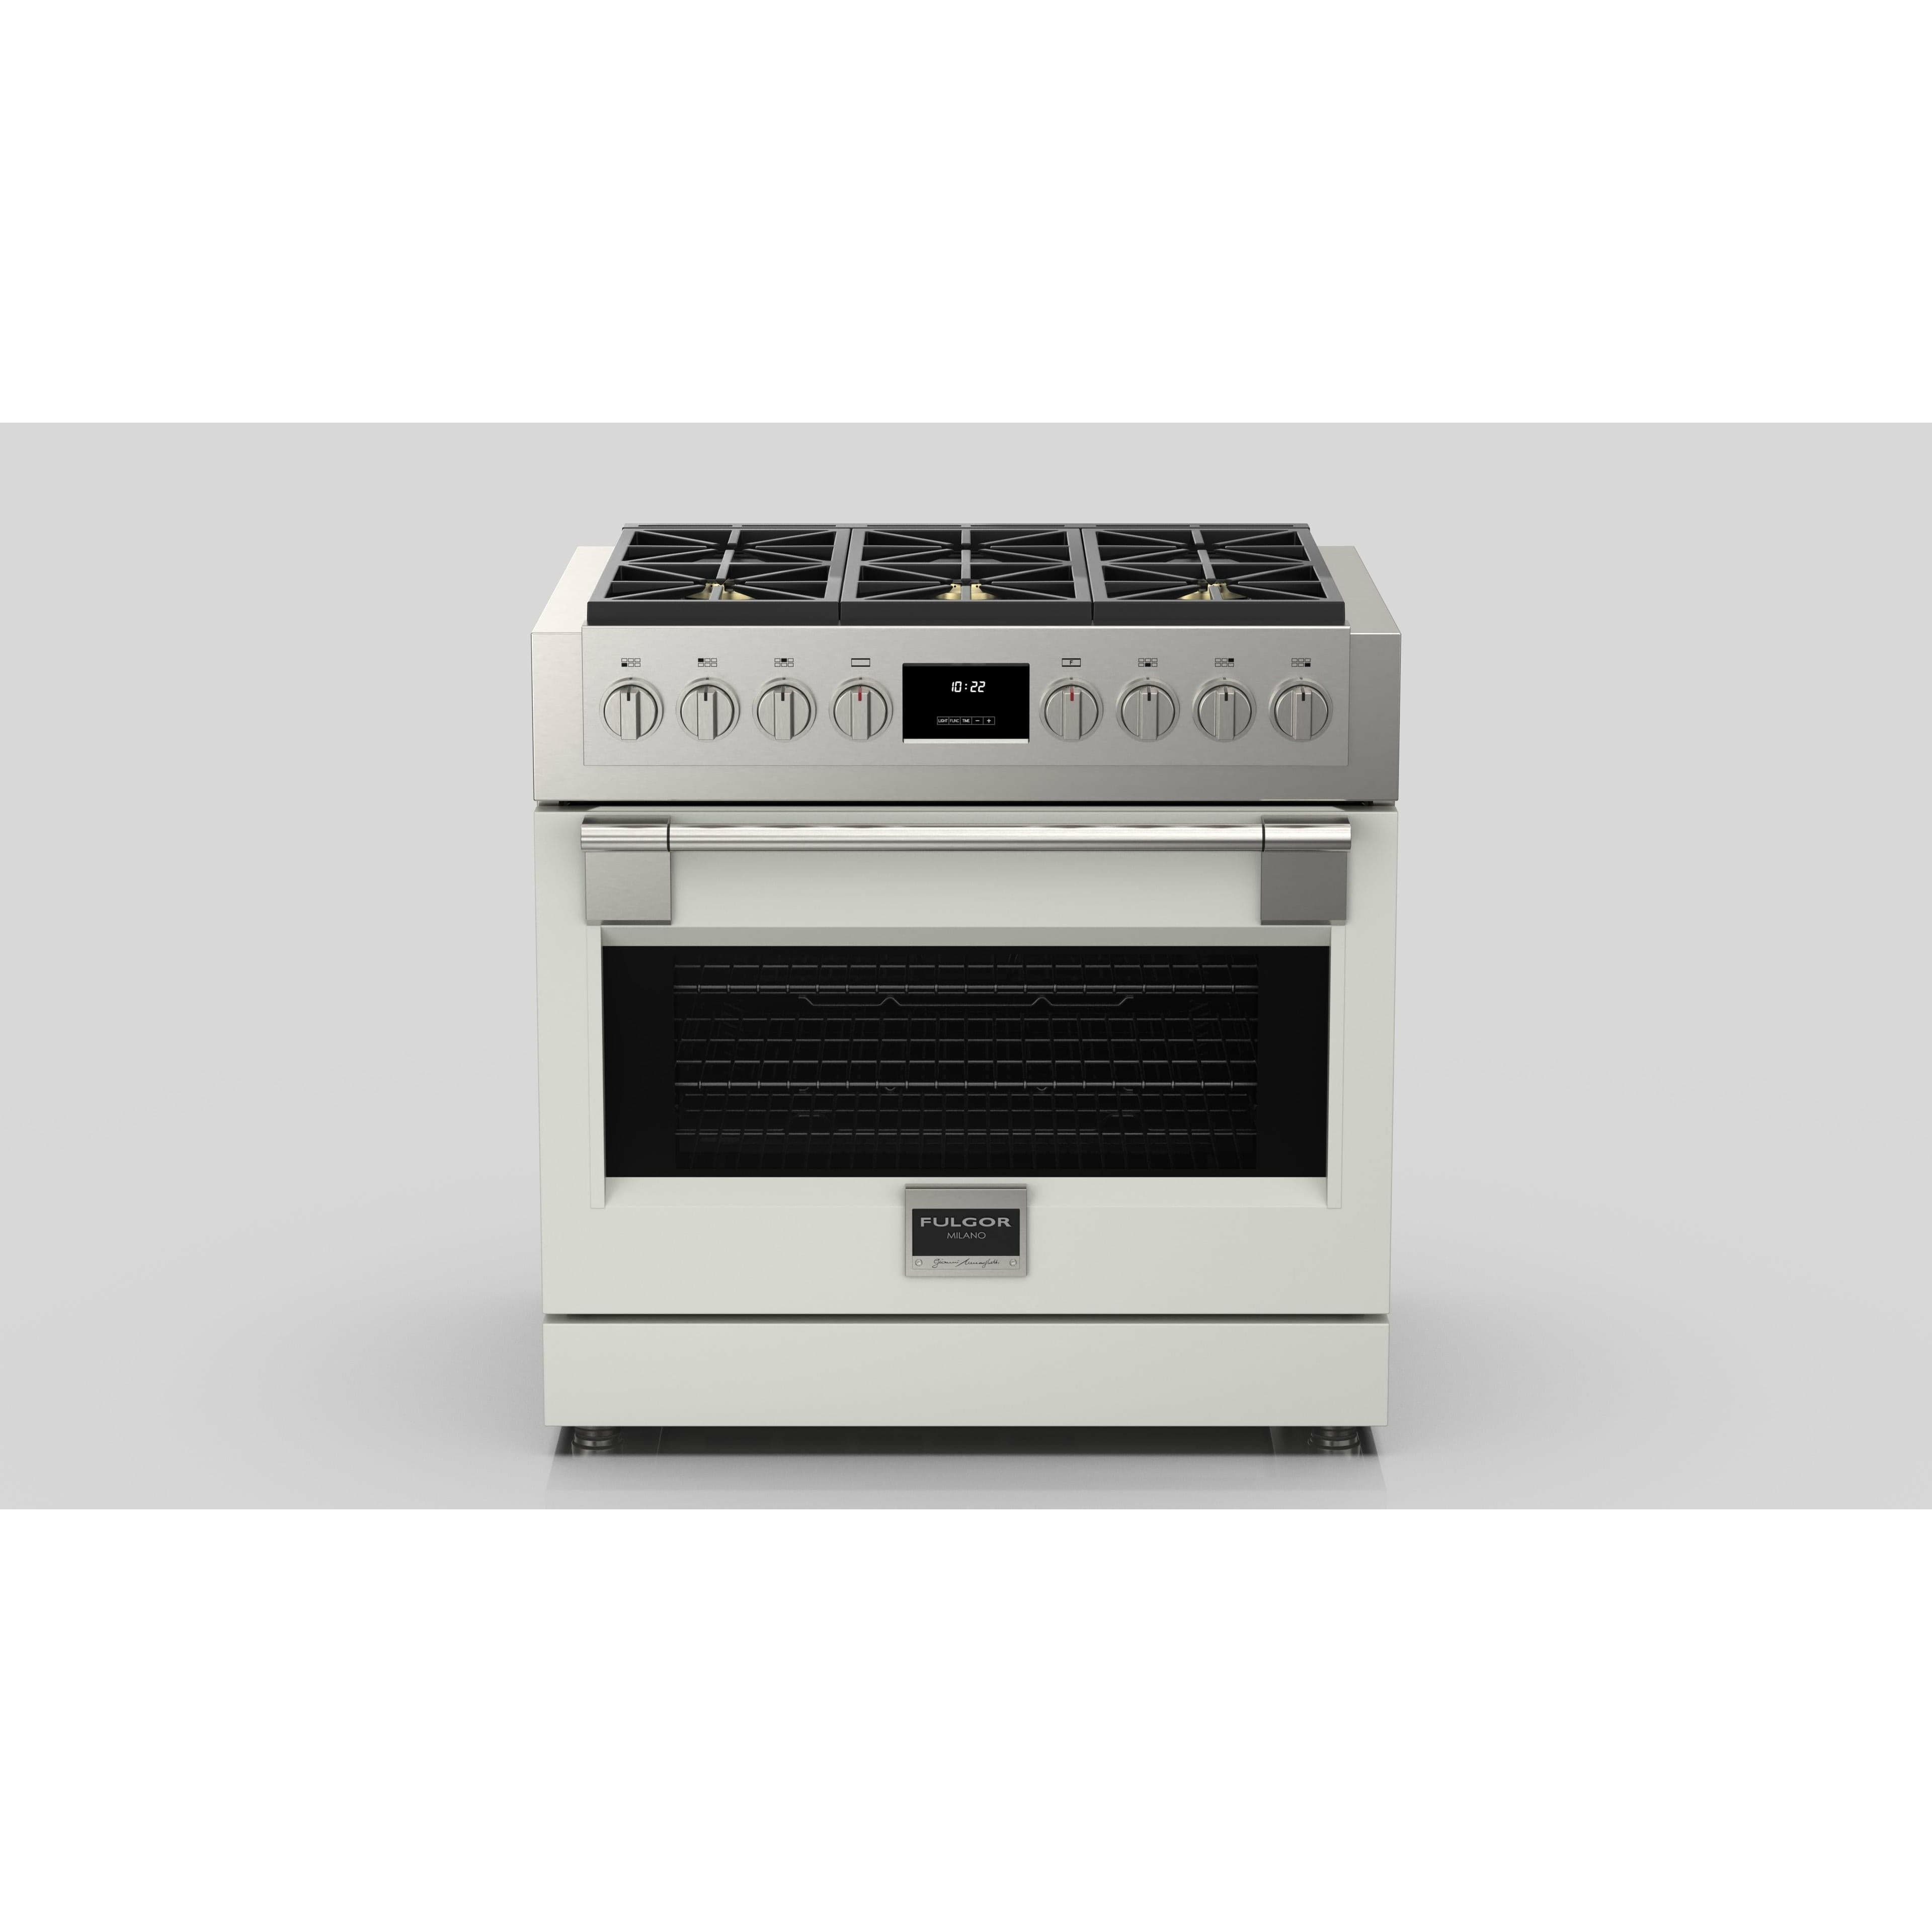 Fulgor Milano 36" Professional Gas Range with 6 Dual-Flame Burners, 5.7 cu. ft. Capacity, Stainless Steel - F6PGR366S2 Ranges PDRKIT36MW Luxury Appliances Direct